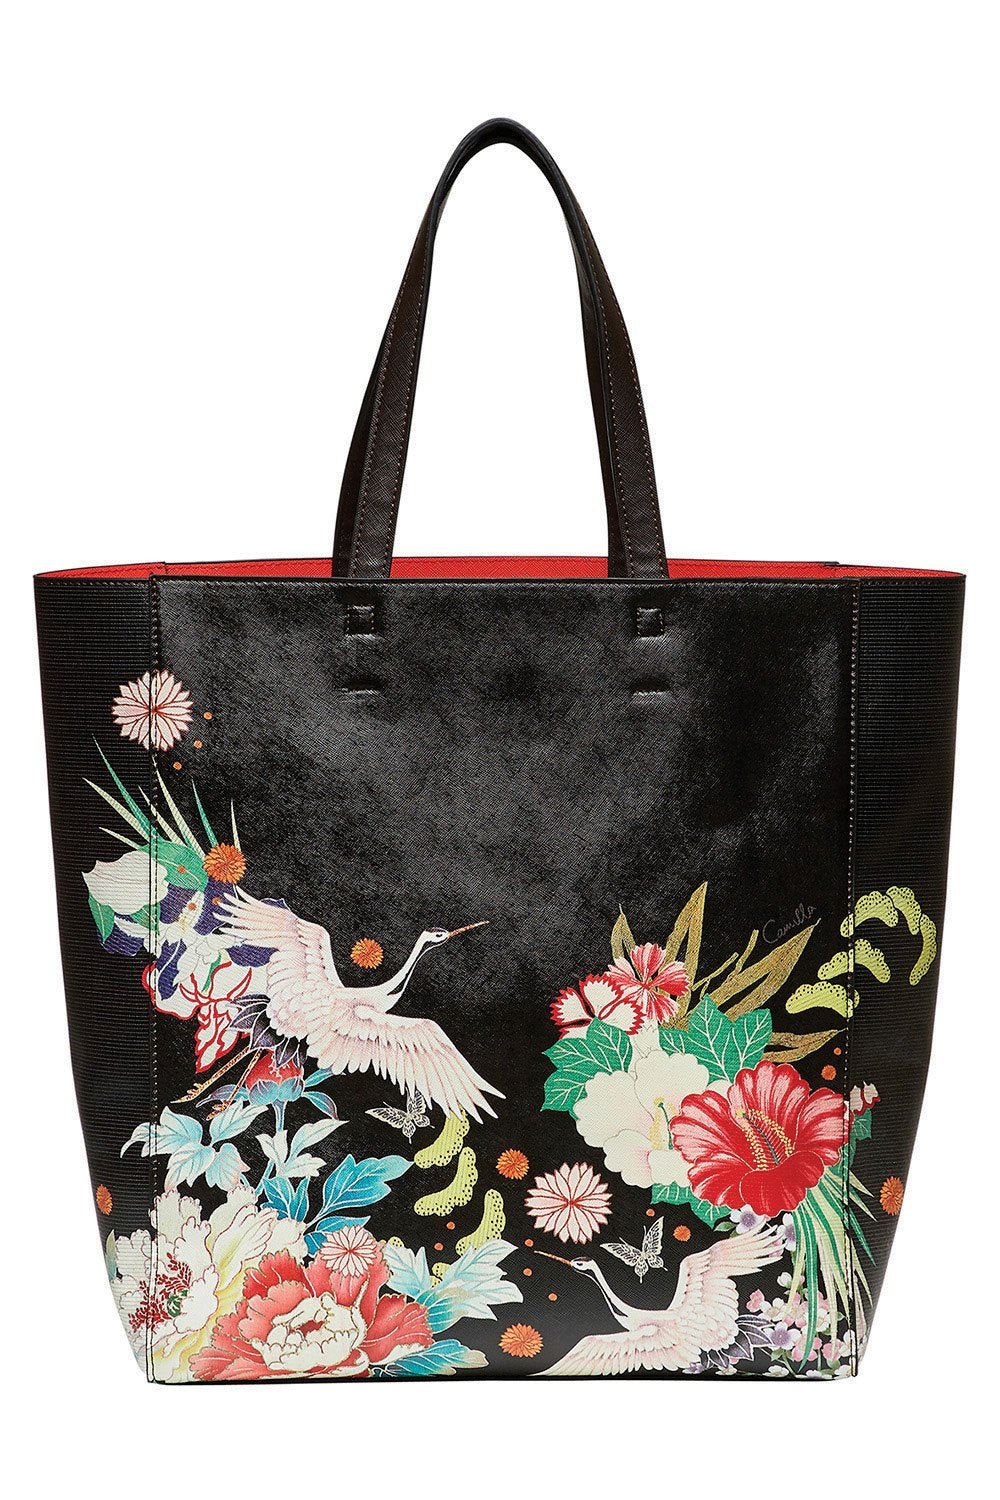 CAMILLA QUEEN OF KINGS TOTE